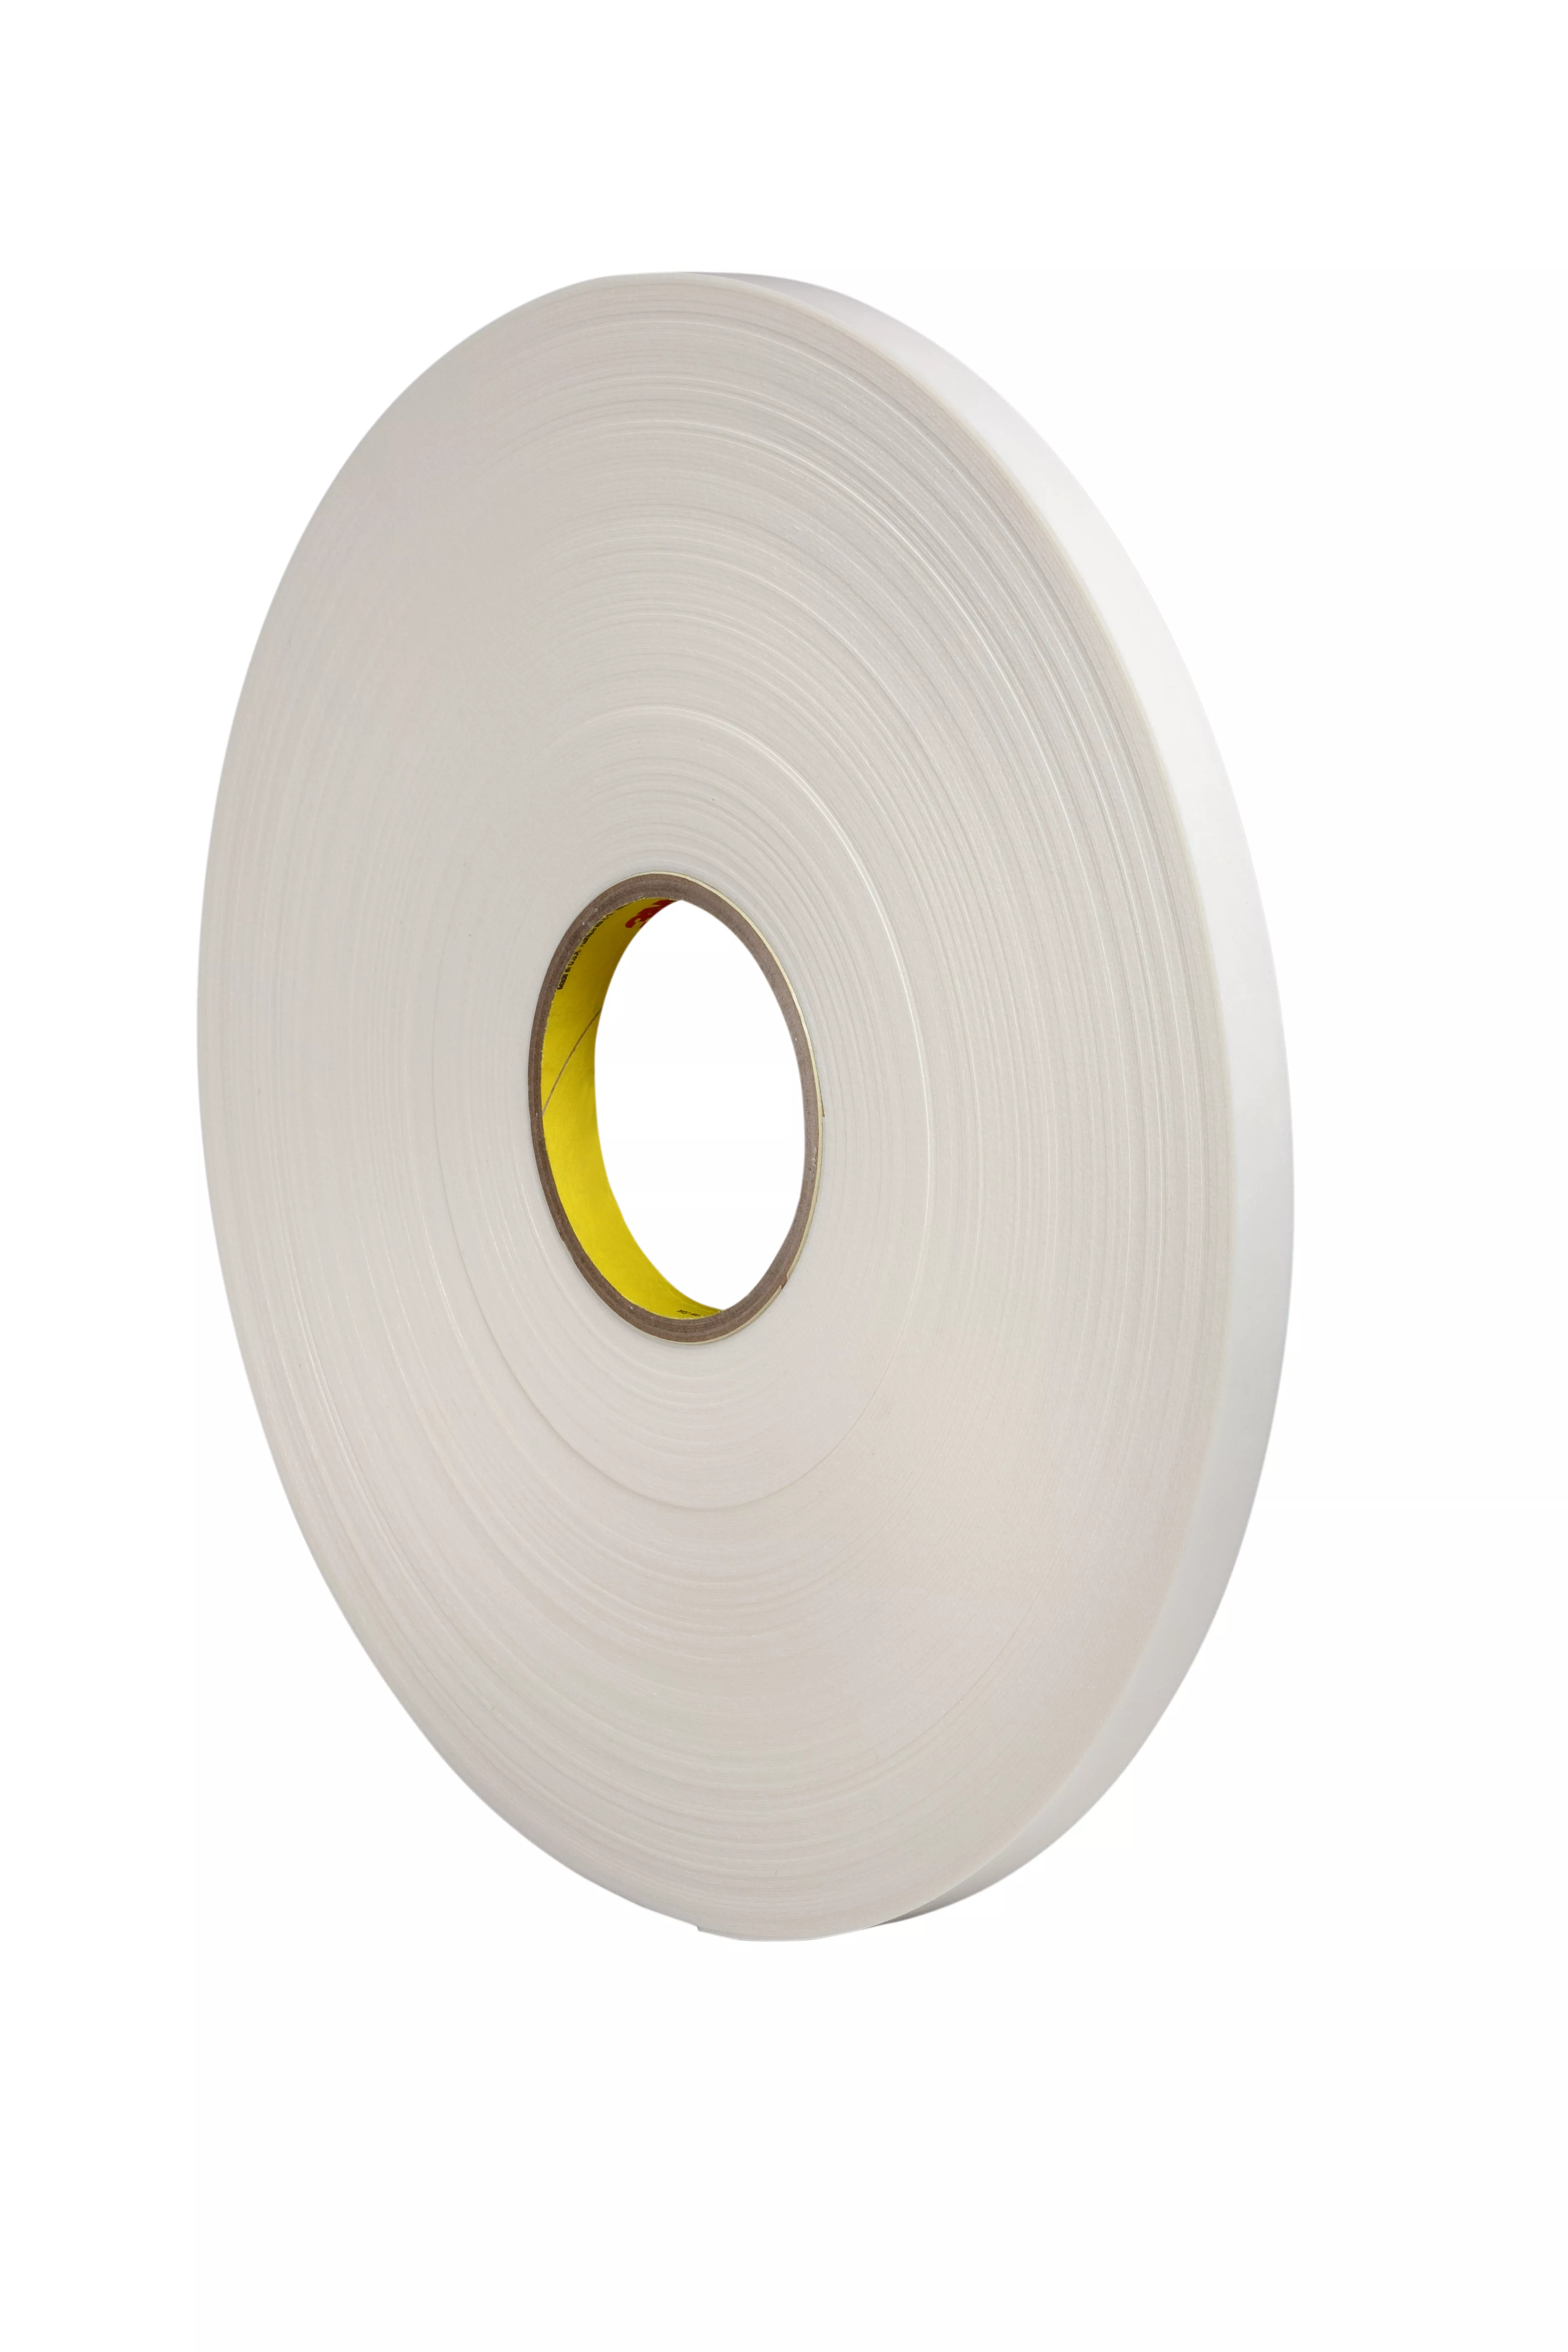 3M™ Urethane Foam Tape 4108, Natural, 4 in x 36 yd, 125 mil, 2 Roll/Case